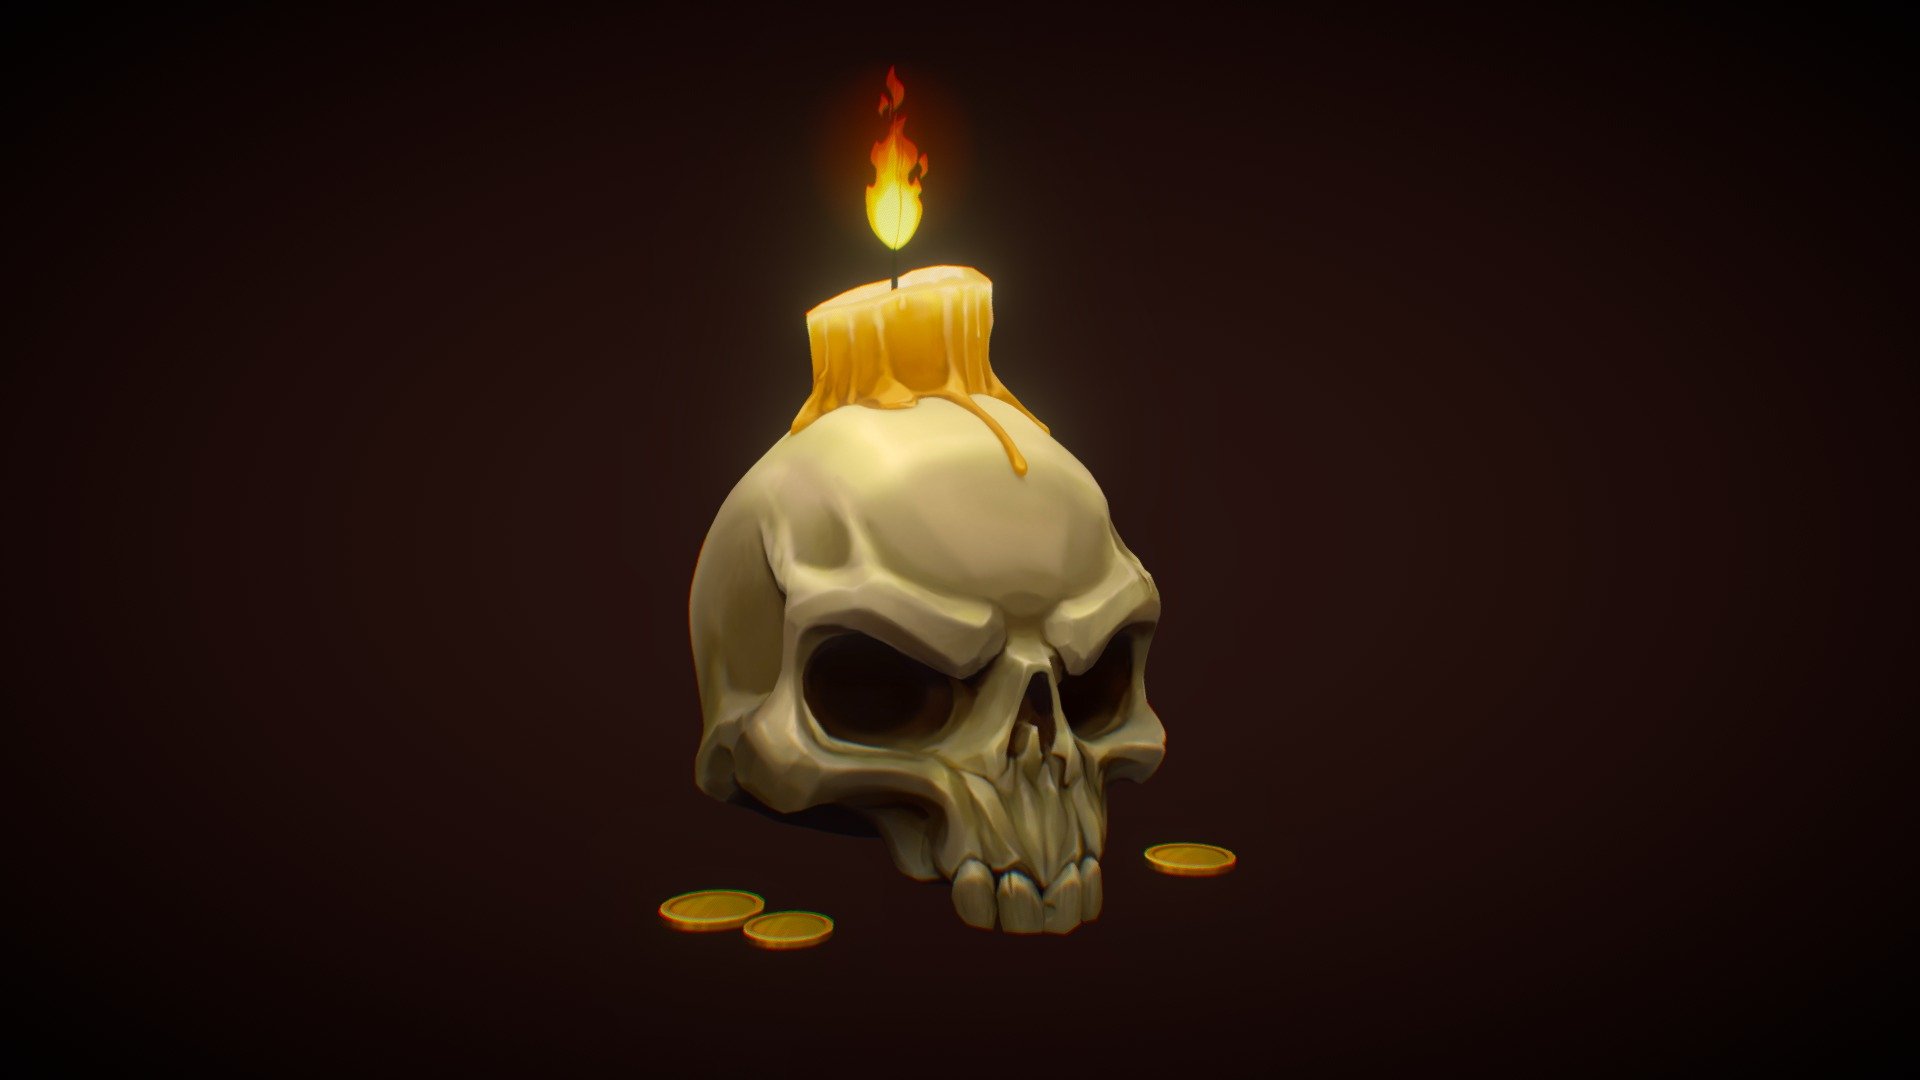 Concept art by Betty Jiang

Follow me on Instagram: @nav.nikitina3 - Stylized skull with a candle - 3D model by nav.nikitina3 3d model